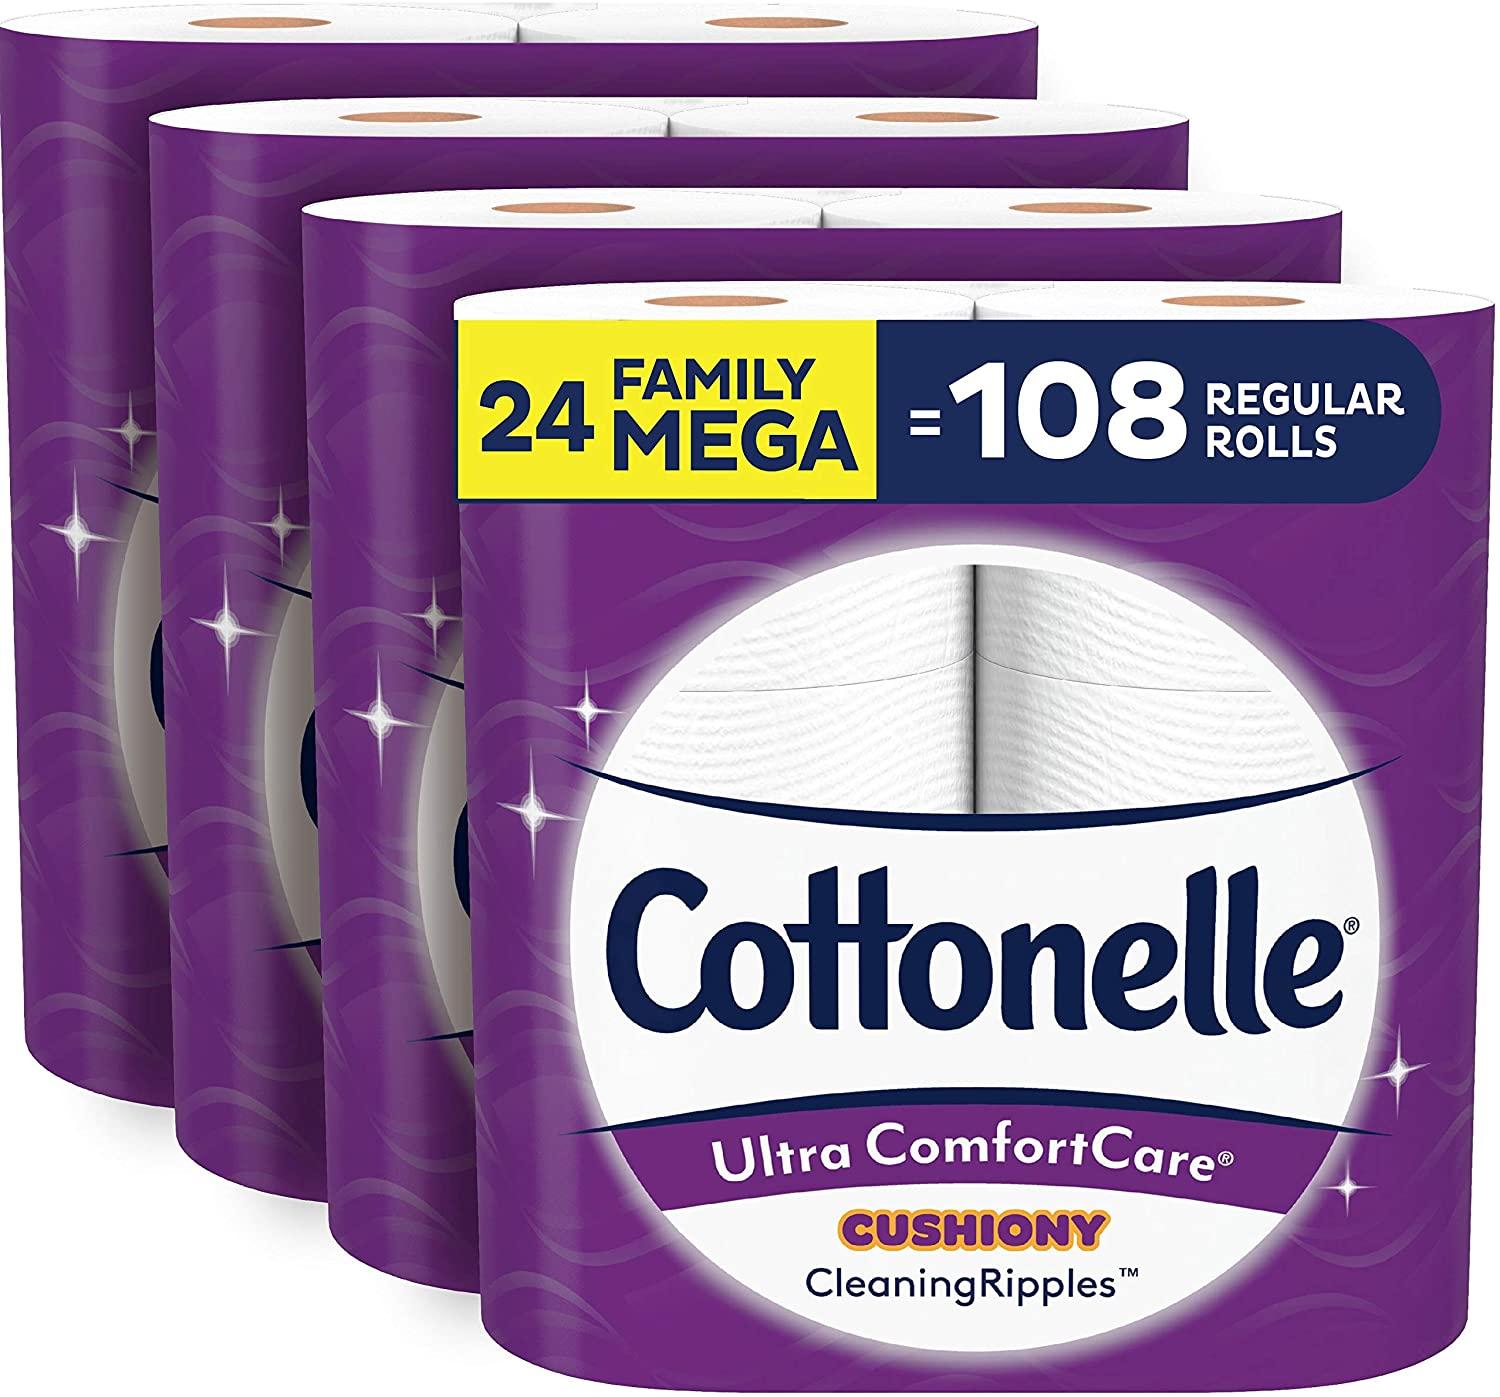 24 Cottonelle Ultra ComfortCare Toilet Paper for $21.74 Shipped